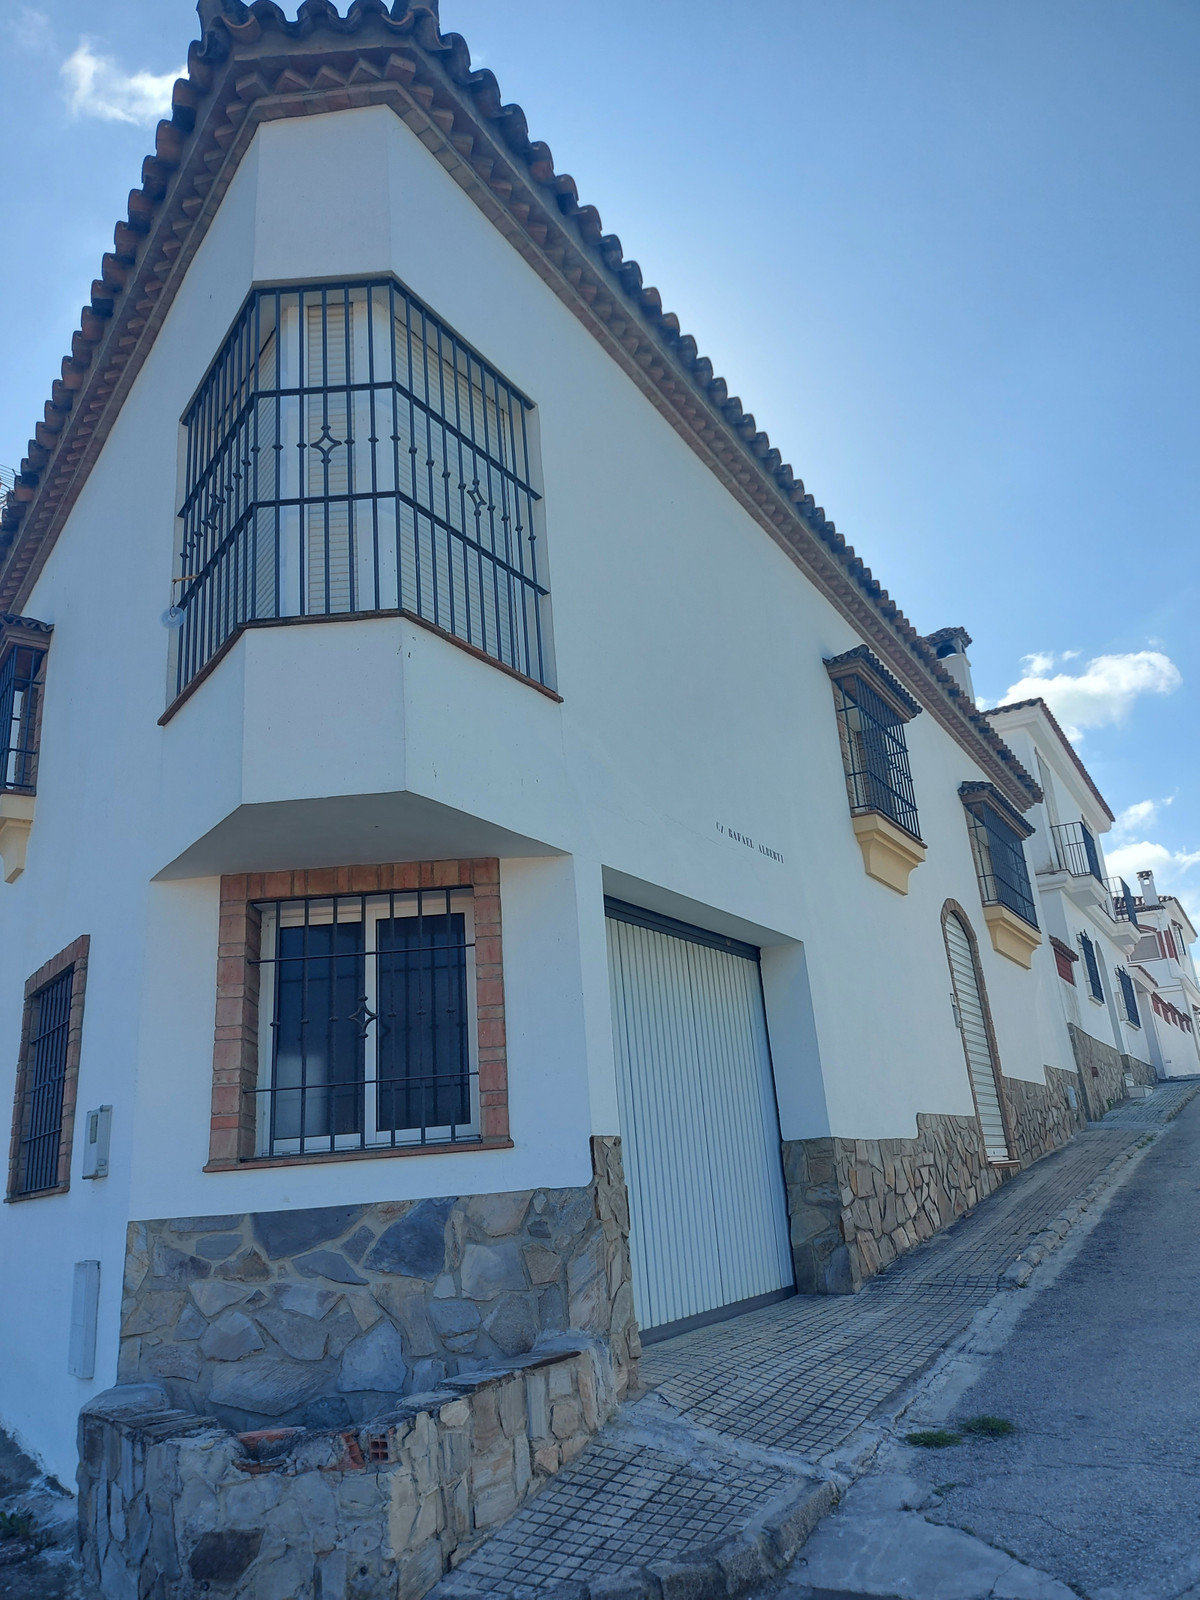 A SUPERB NEWLY CONSTRUCTED HOUSE FOR SALE IN JIMENA DE LA FRONTERA.
At the foot of the Los Alcornoca, Spain